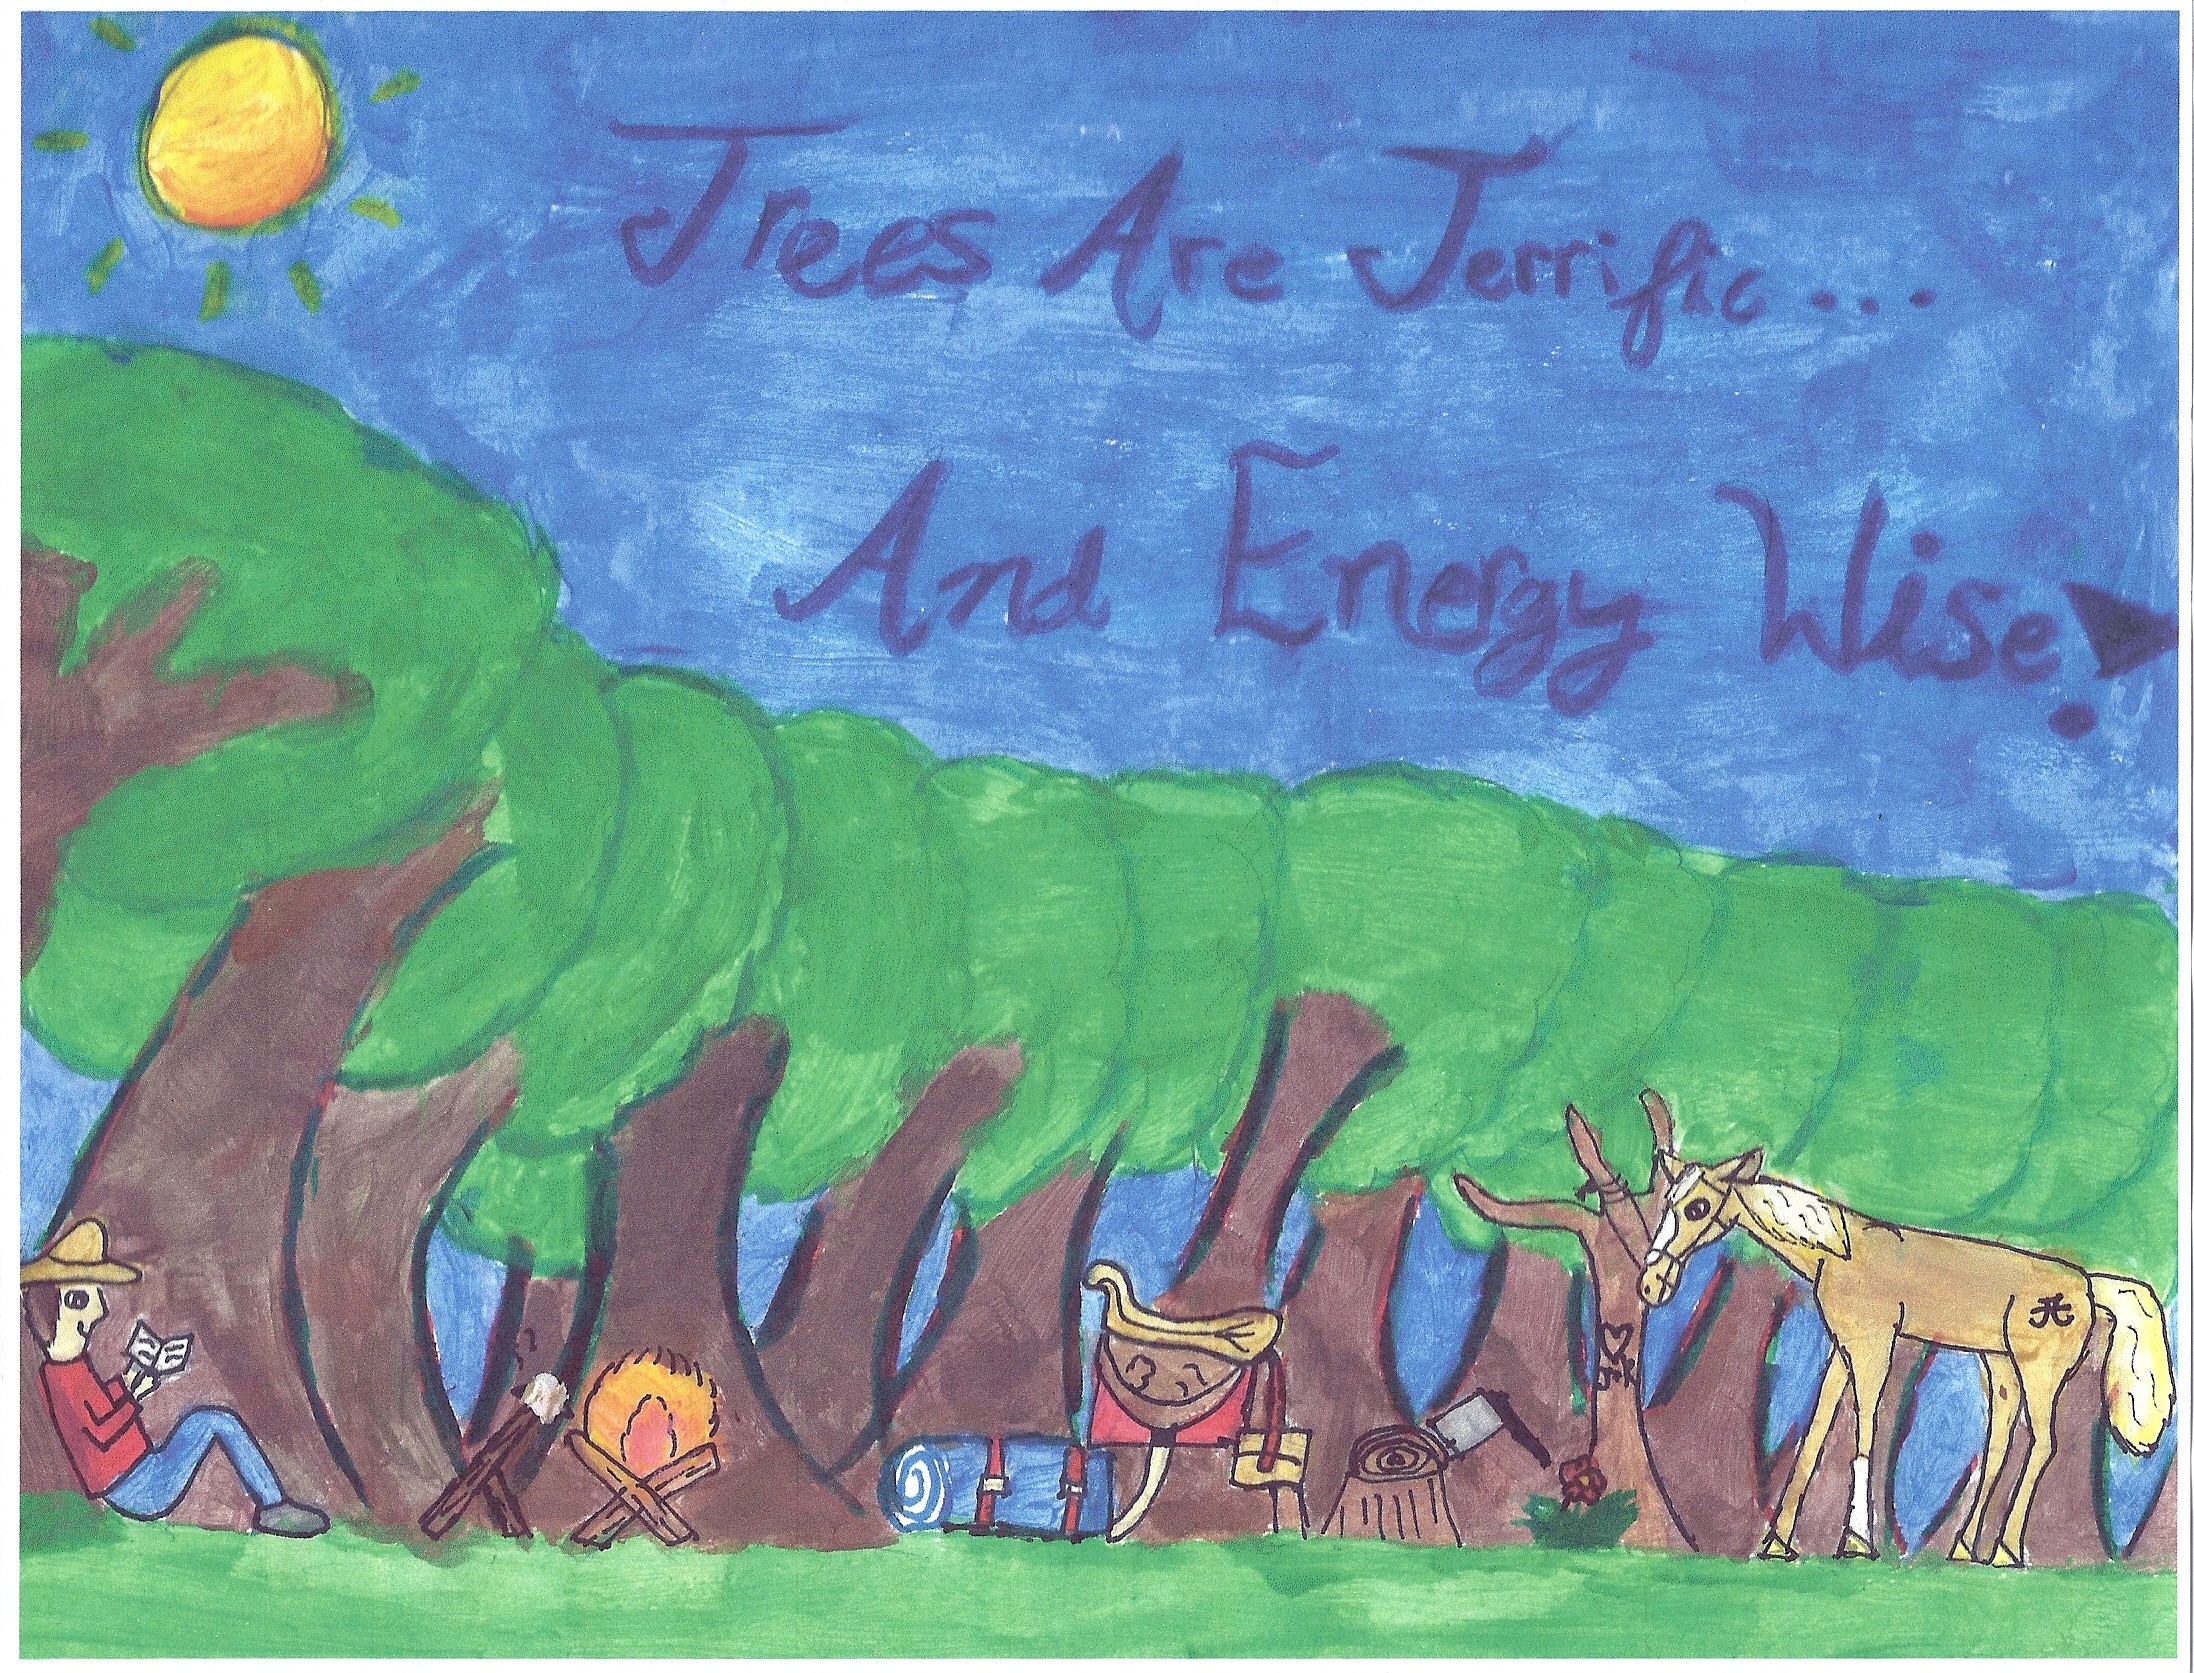 Filed under: Arbor Day , Art , Family | Leave a comment »